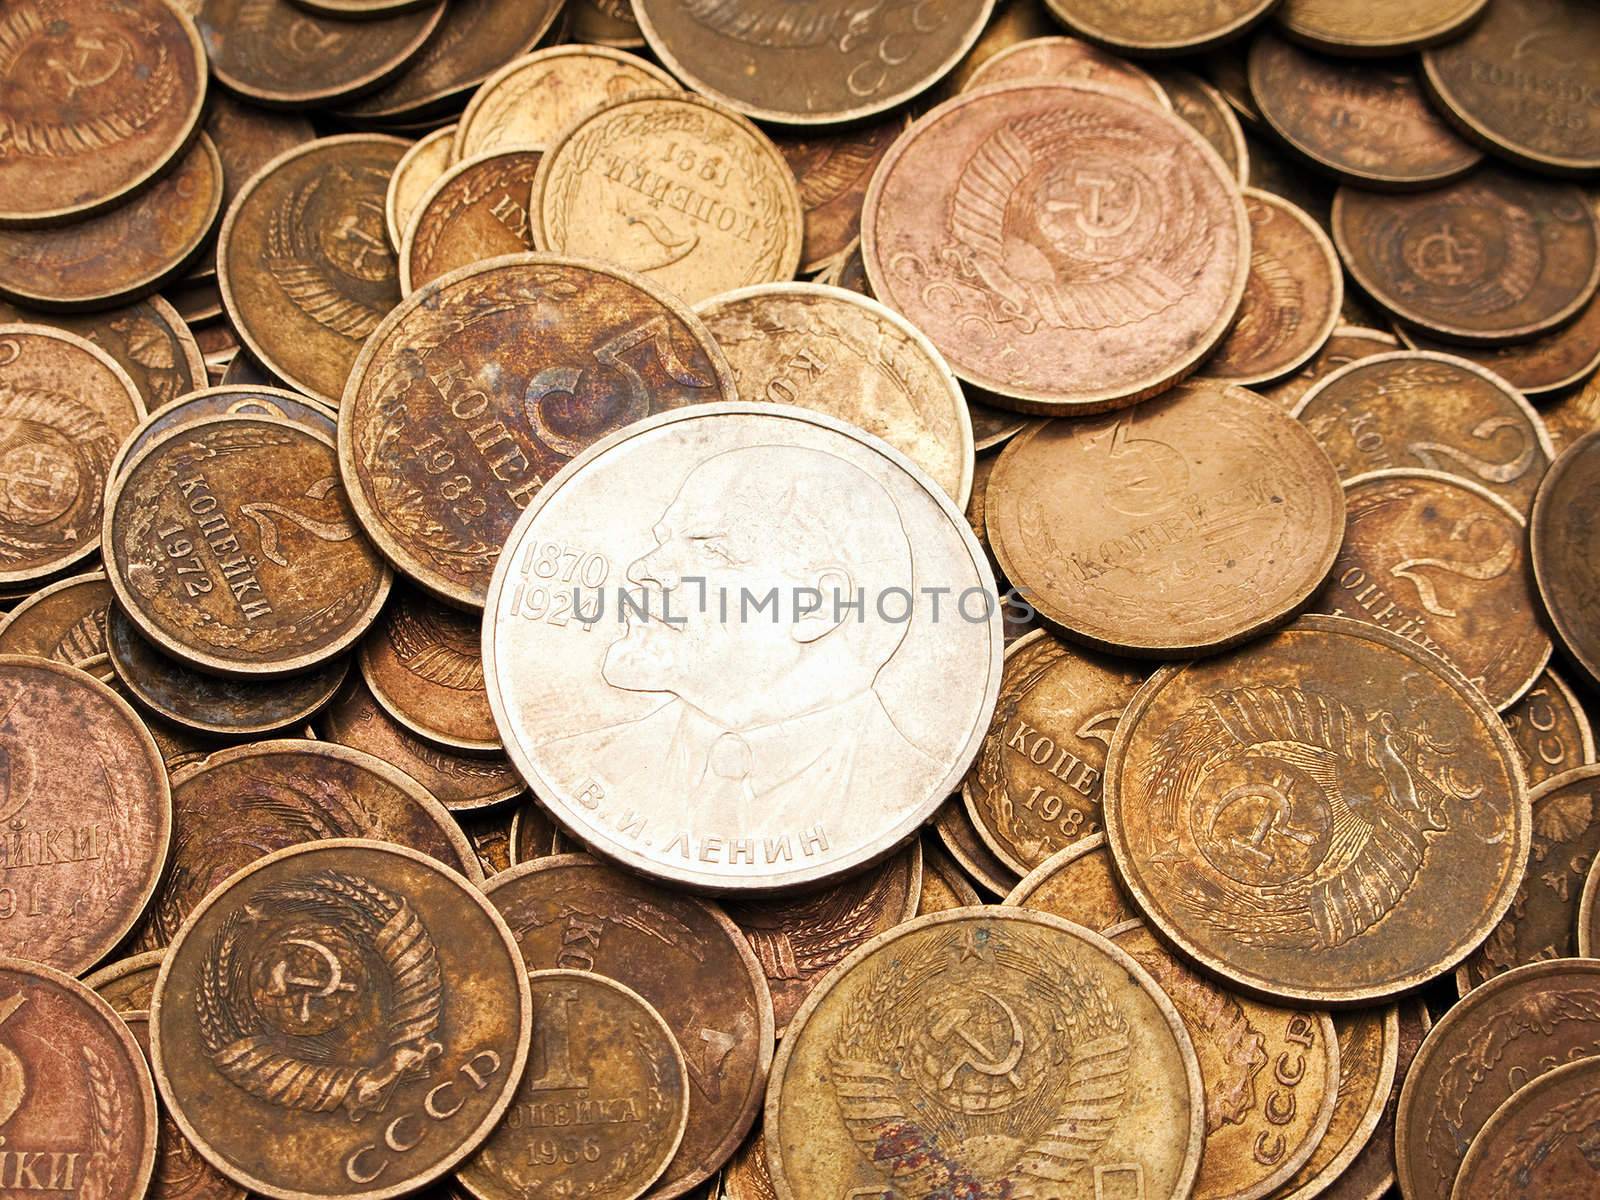 Currency coin backgrounds - finance wealth savings